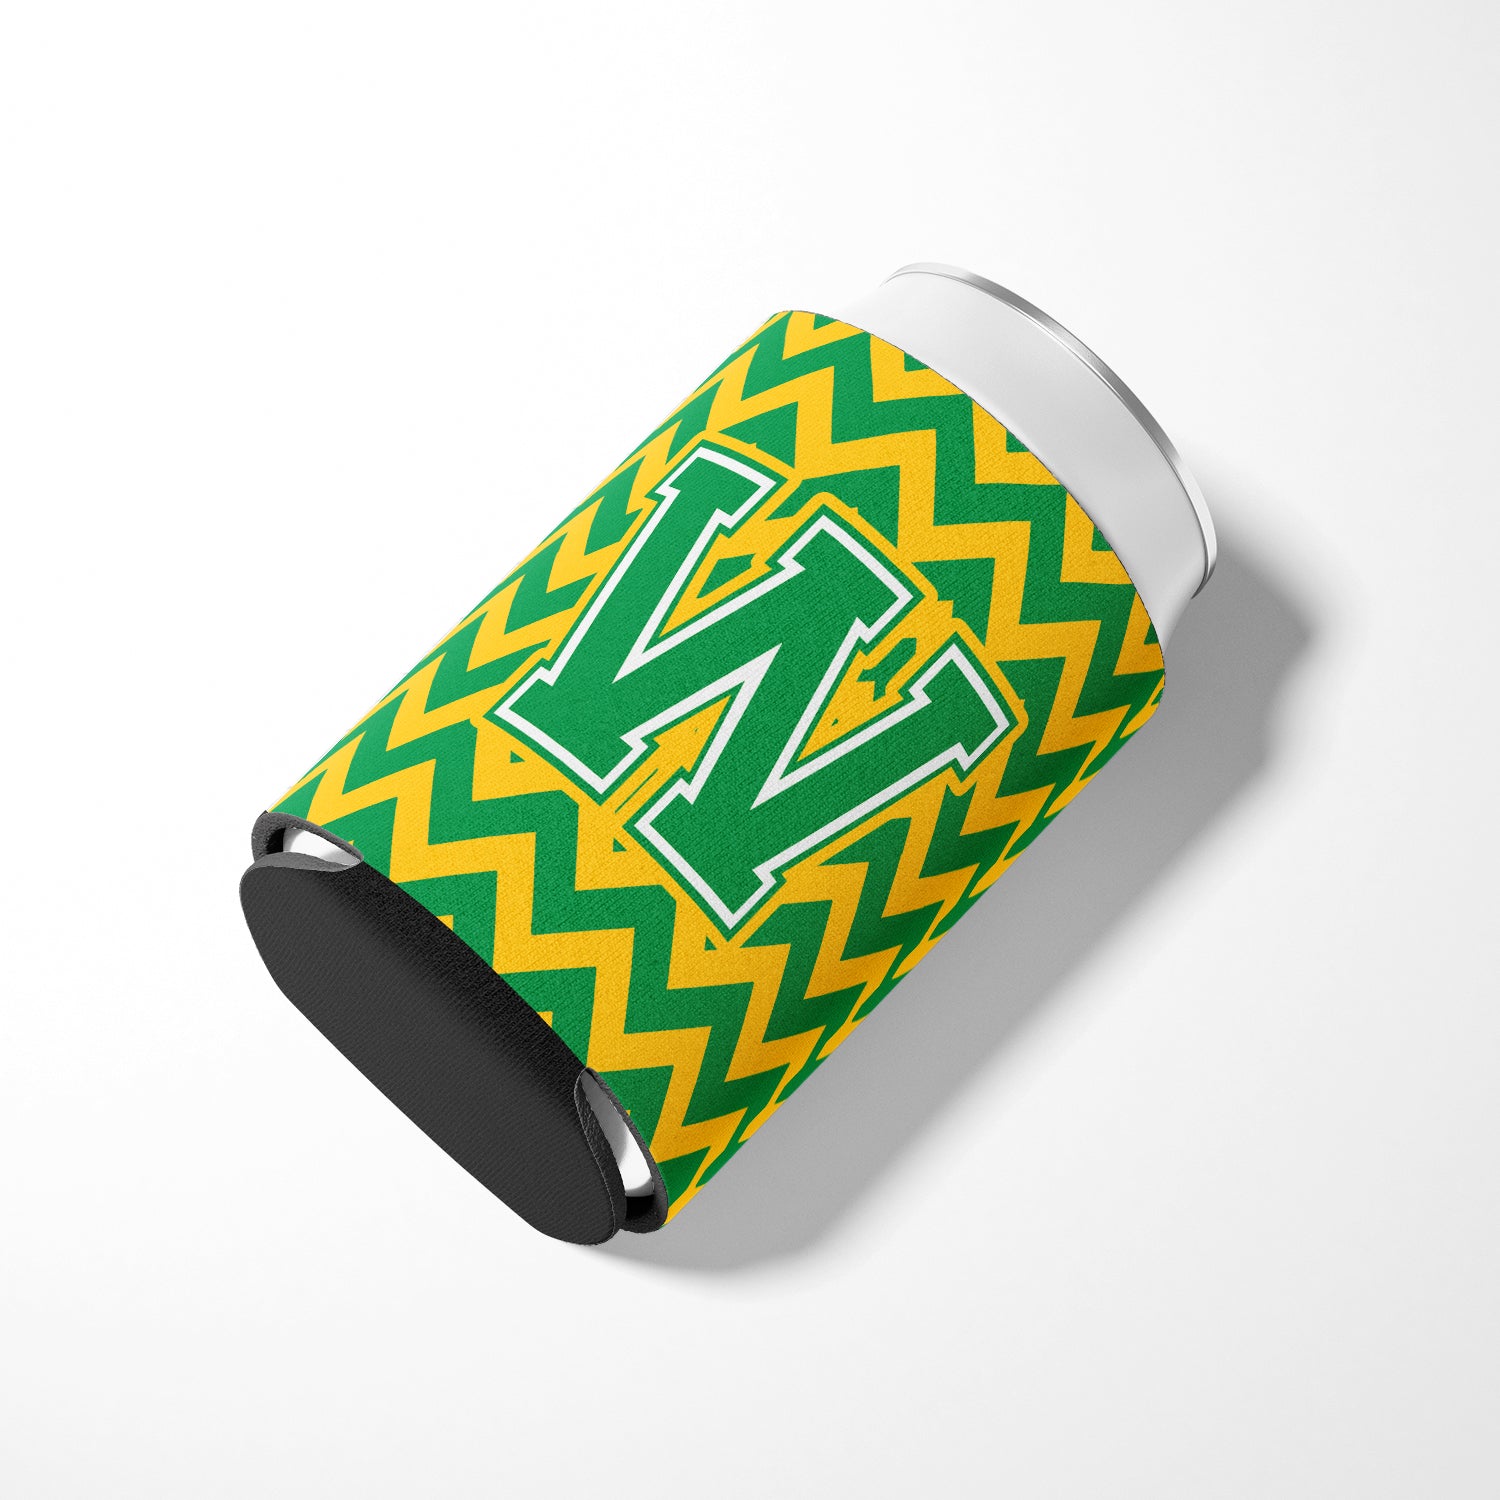 Letter W Chevron Green and Gold Can or Bottle Hugger CJ1059-WCC